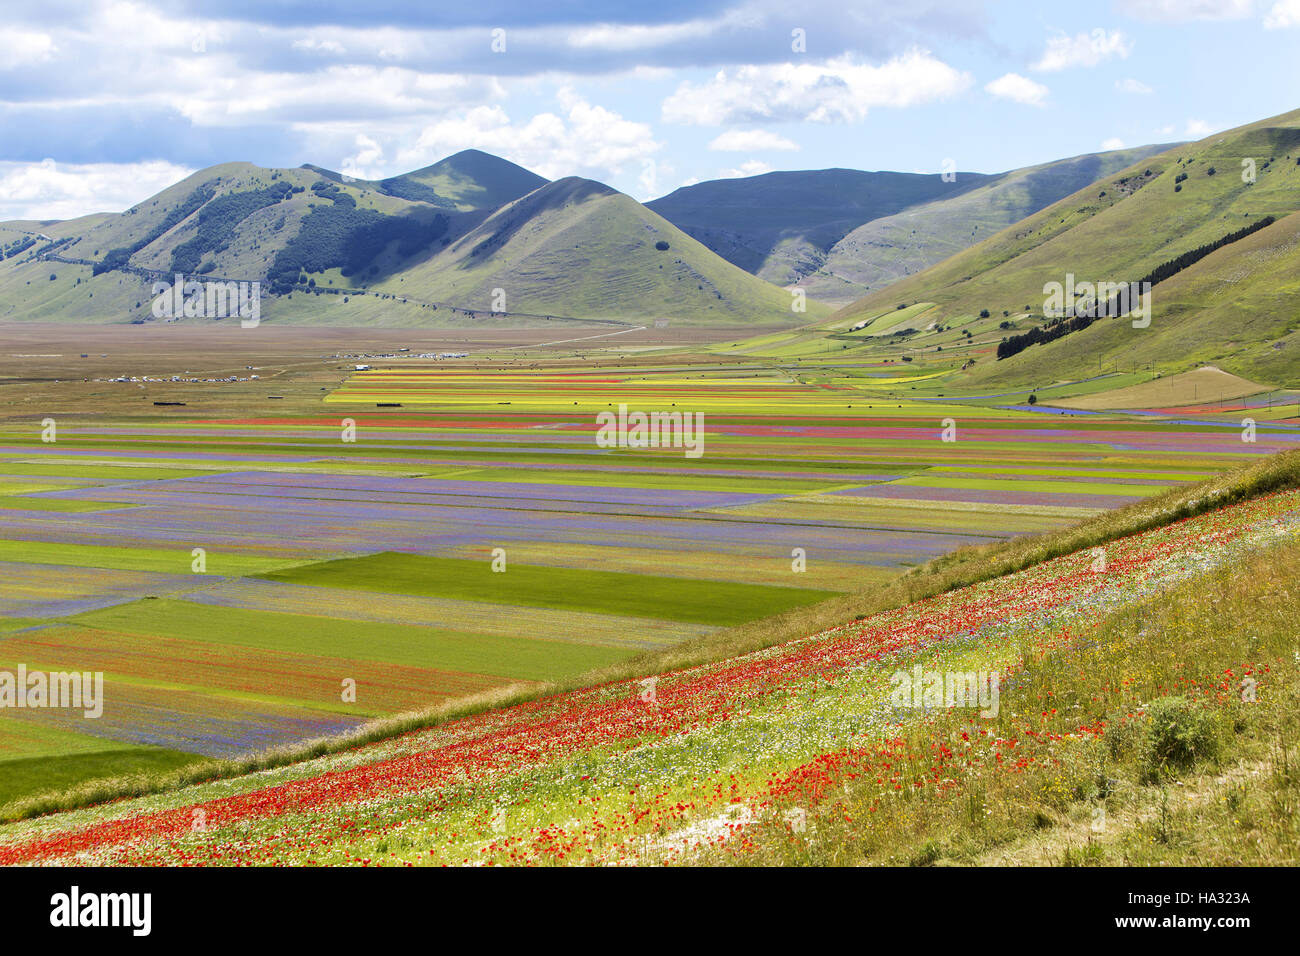 Castelluccio of Norcia, a town in the national park of the Sibillini mountains in Italy. City destroyed by an earthquake in Octo Stock Photo